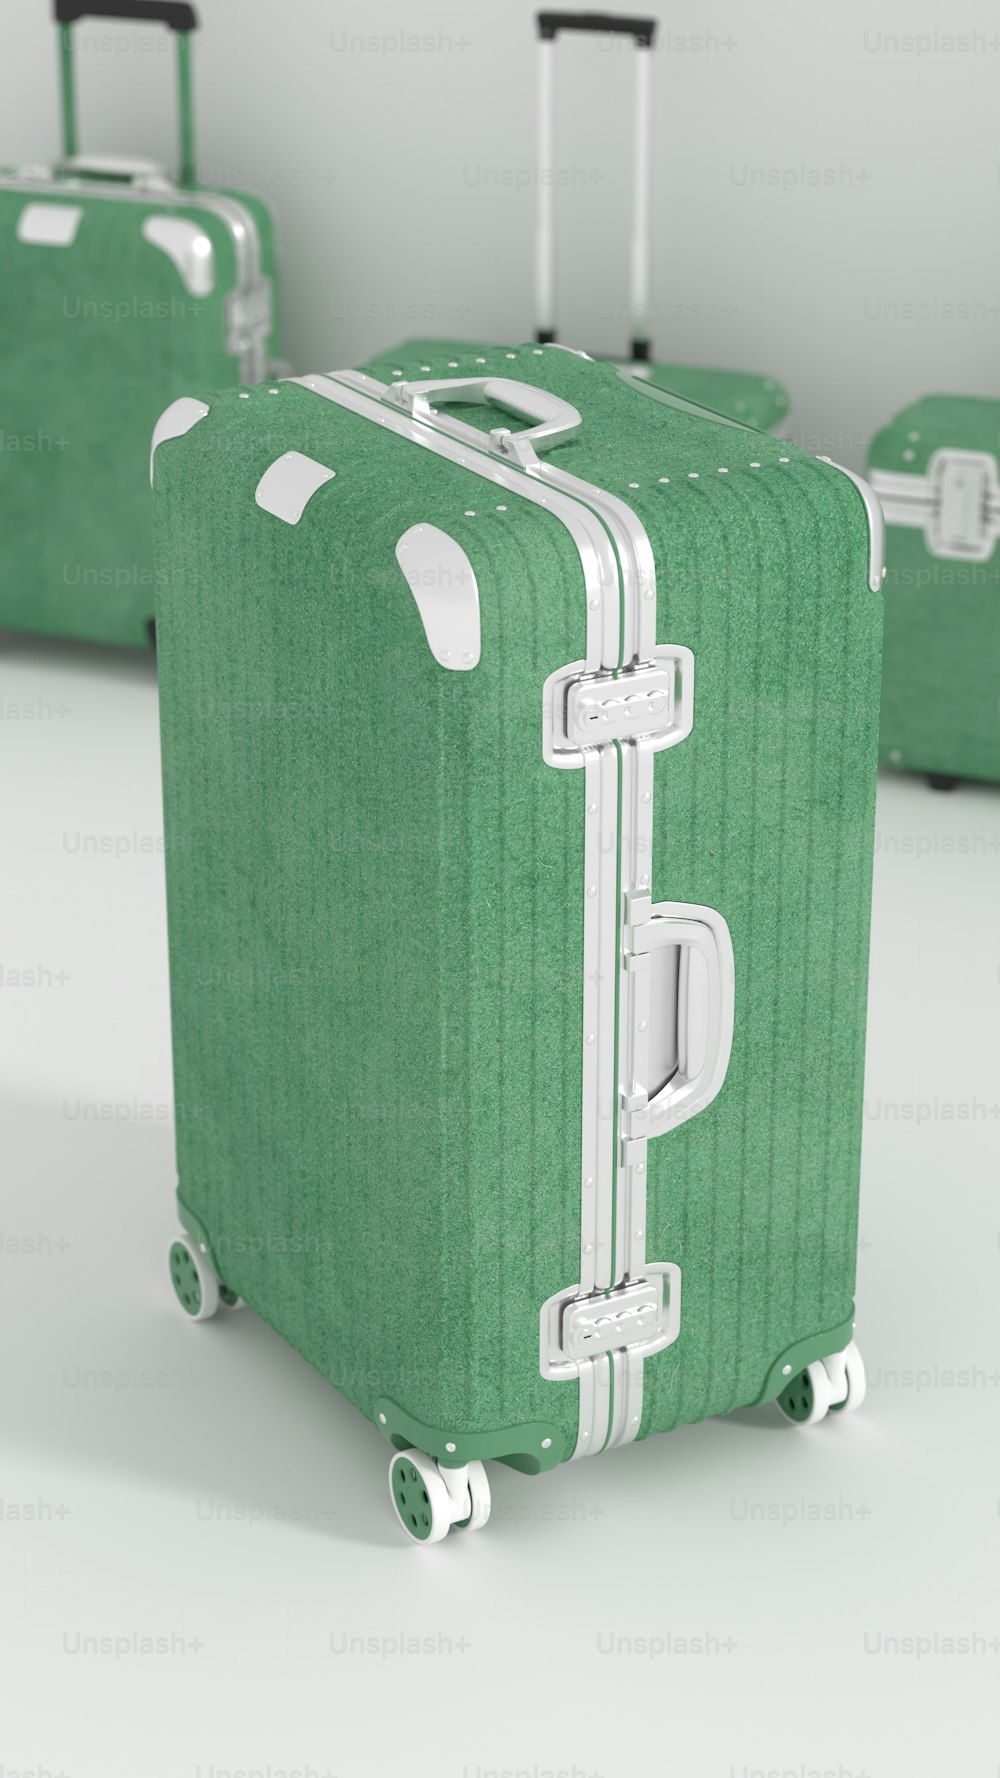 three pieces of green luggage sitting next to each other